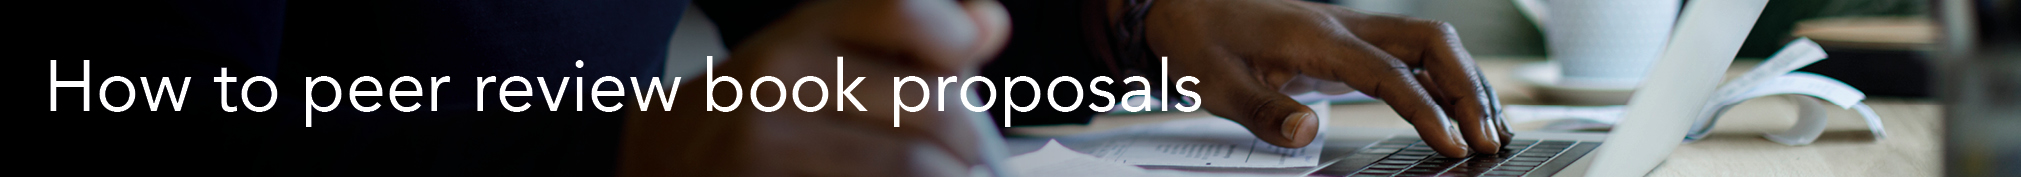 How to peer review book proposals